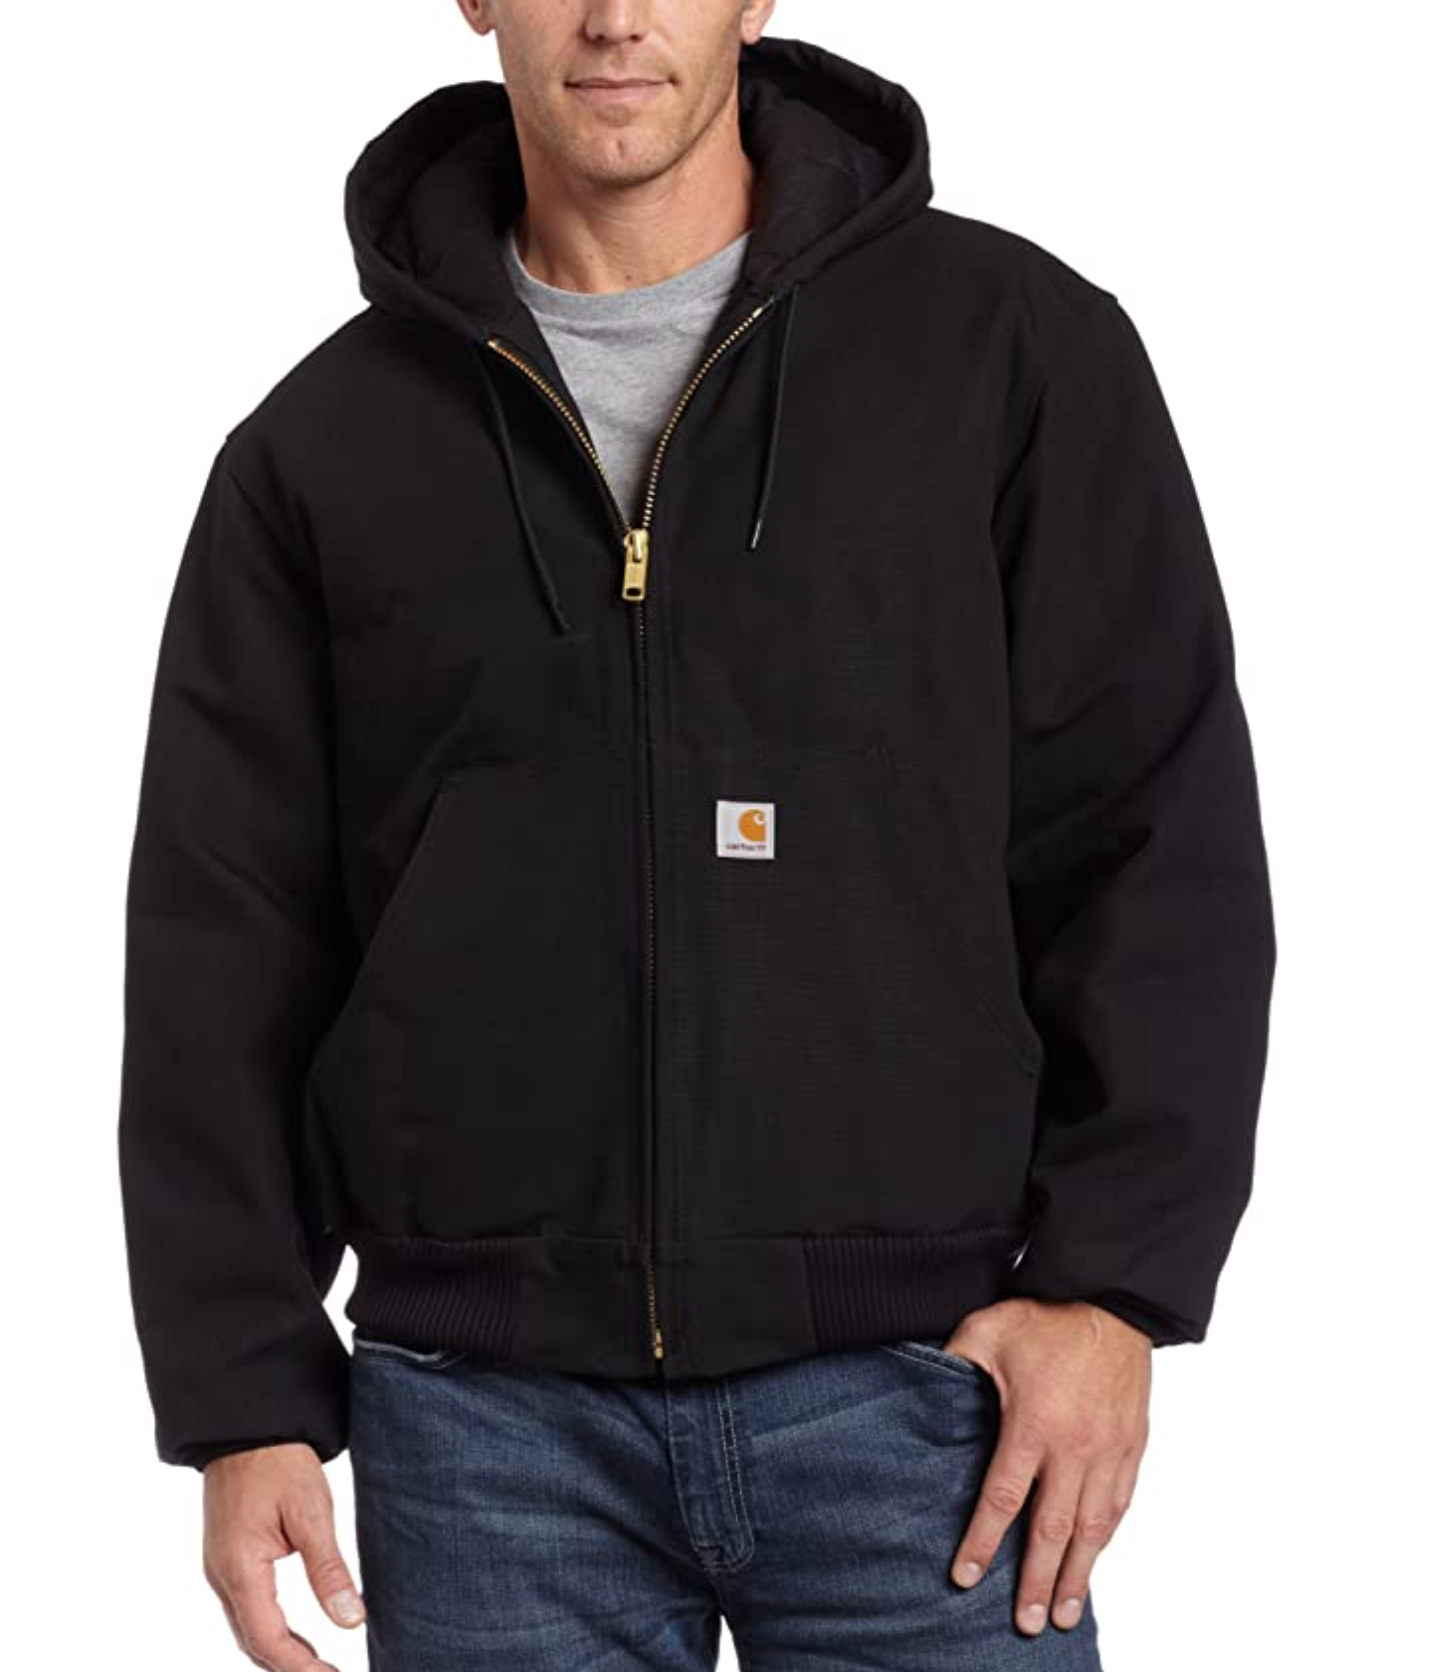 5 highest-rated Carhartt work jackets of 2021 | AGDAILY